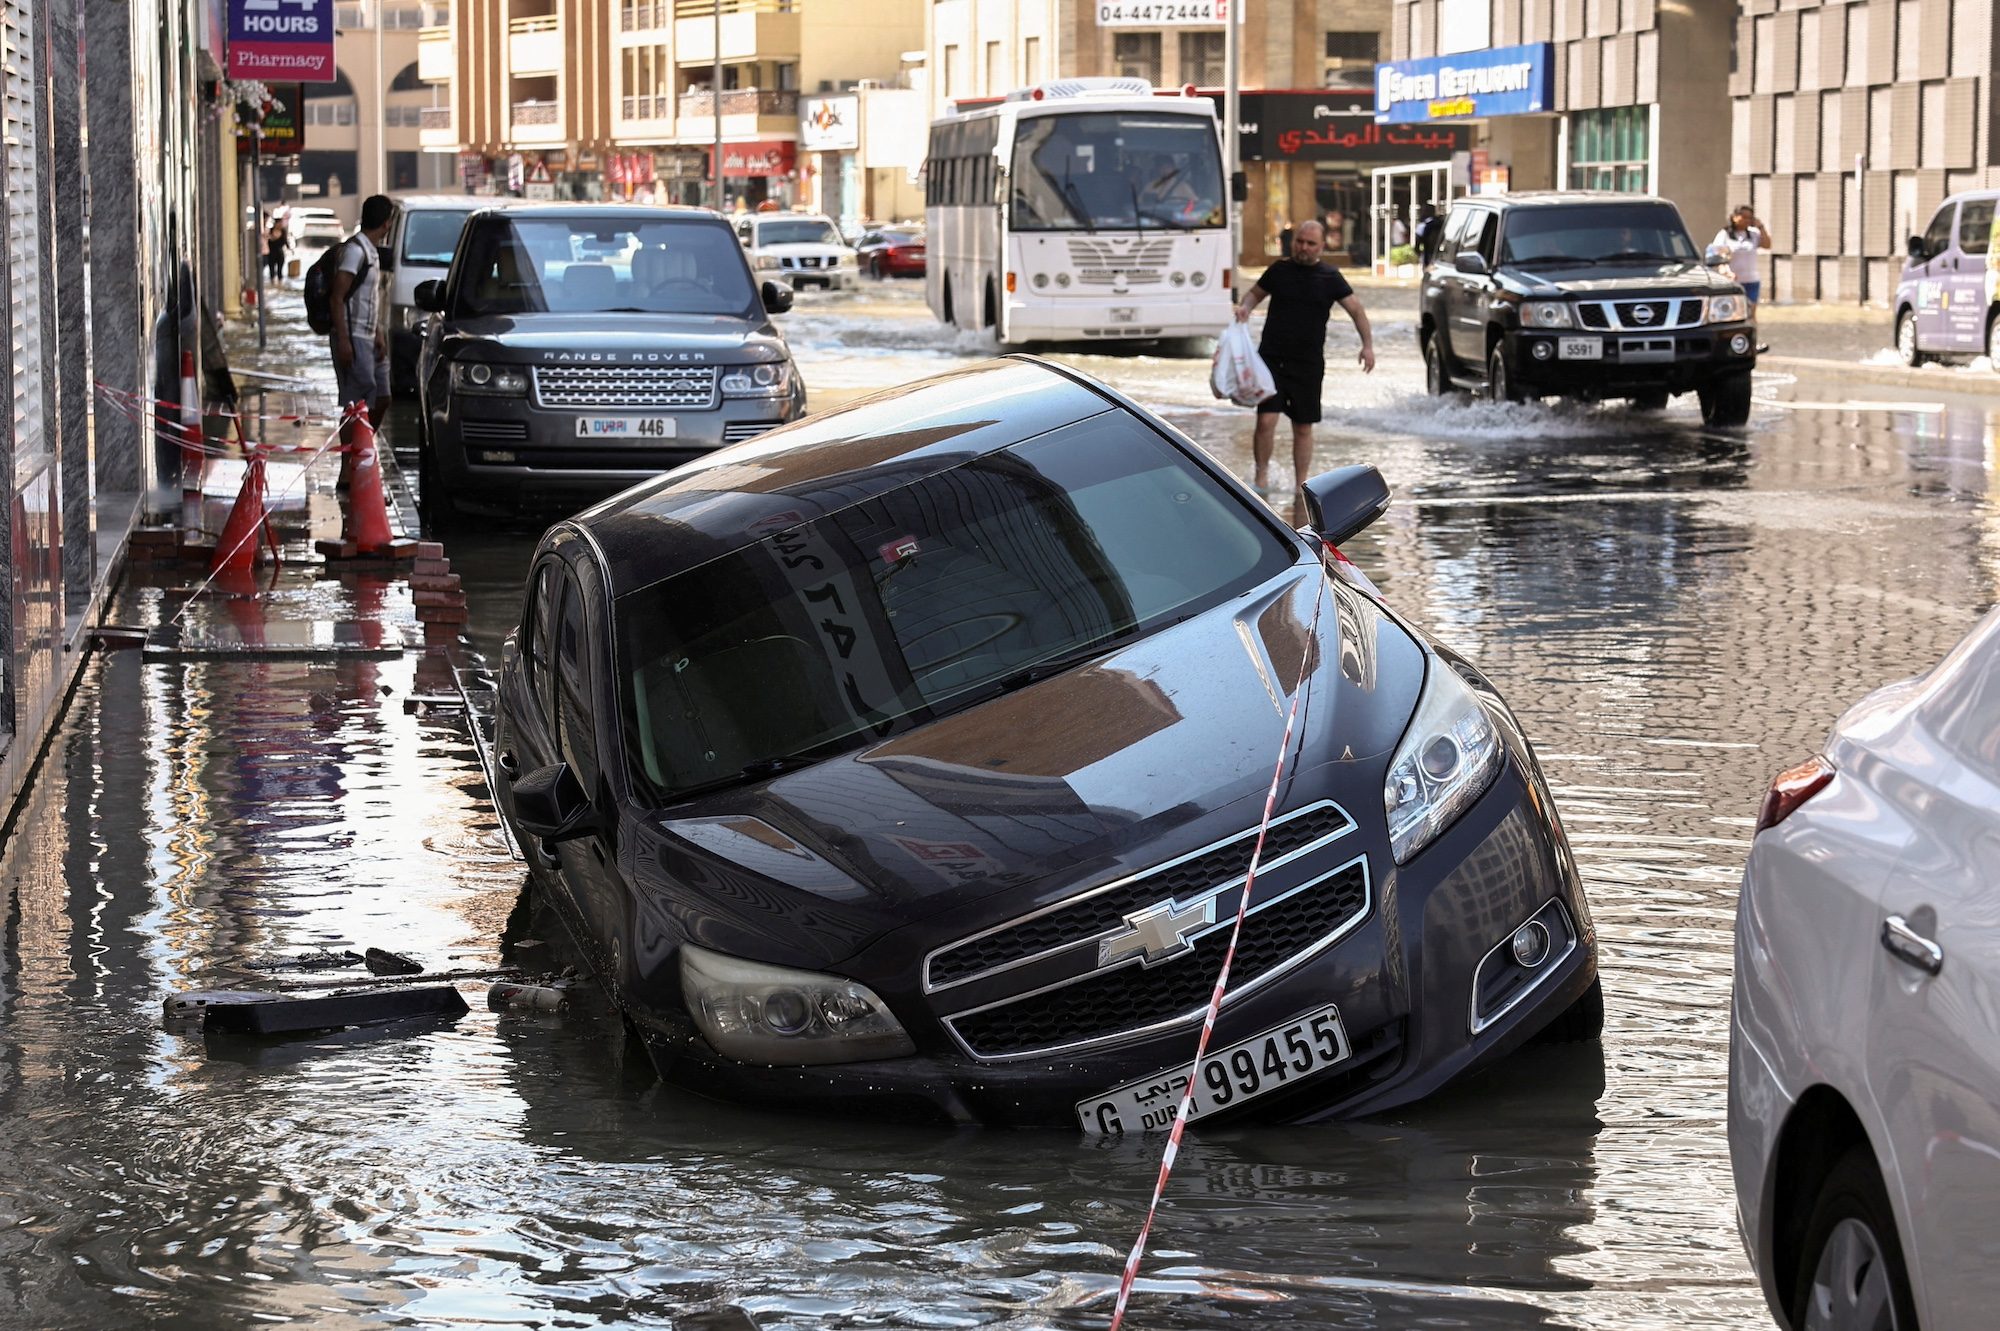 A car is stranded in flood water caused by heavy rains, in Dubai, United Arab Emirates, April 17, 2024. REUTERS/Amr Alfiky